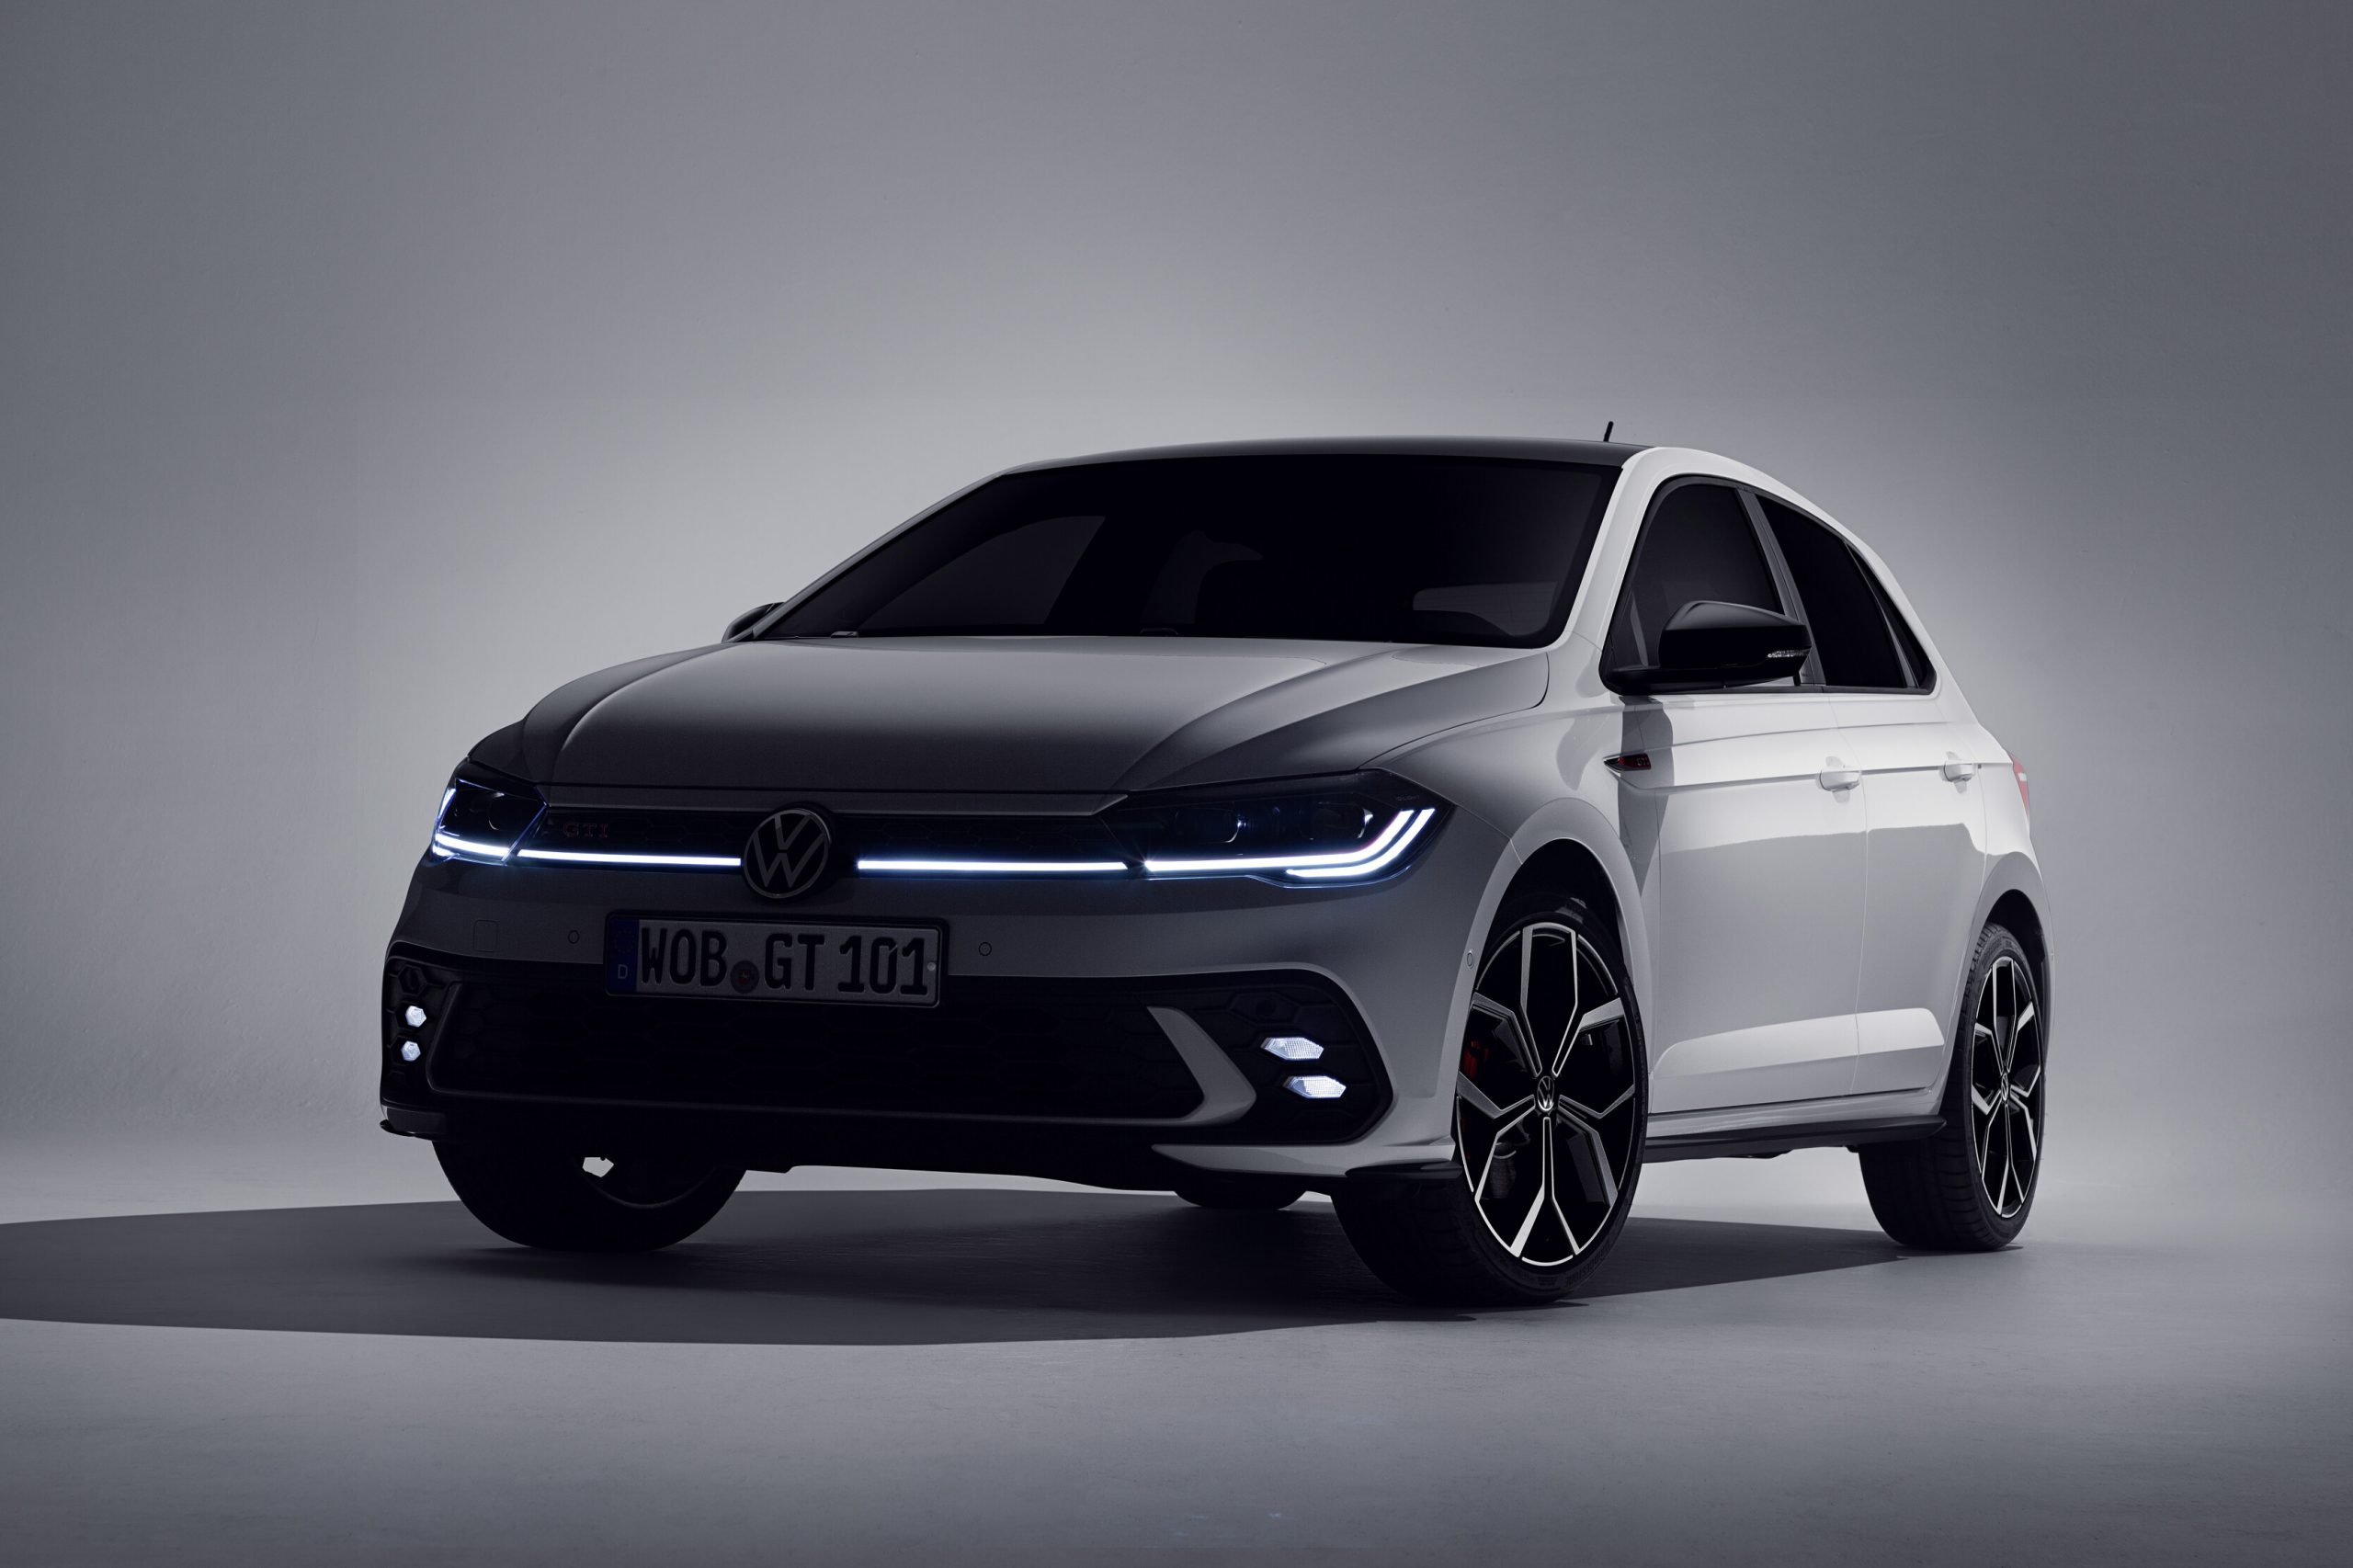 Volkswagen's Polo gets a new look and is loaded with technology